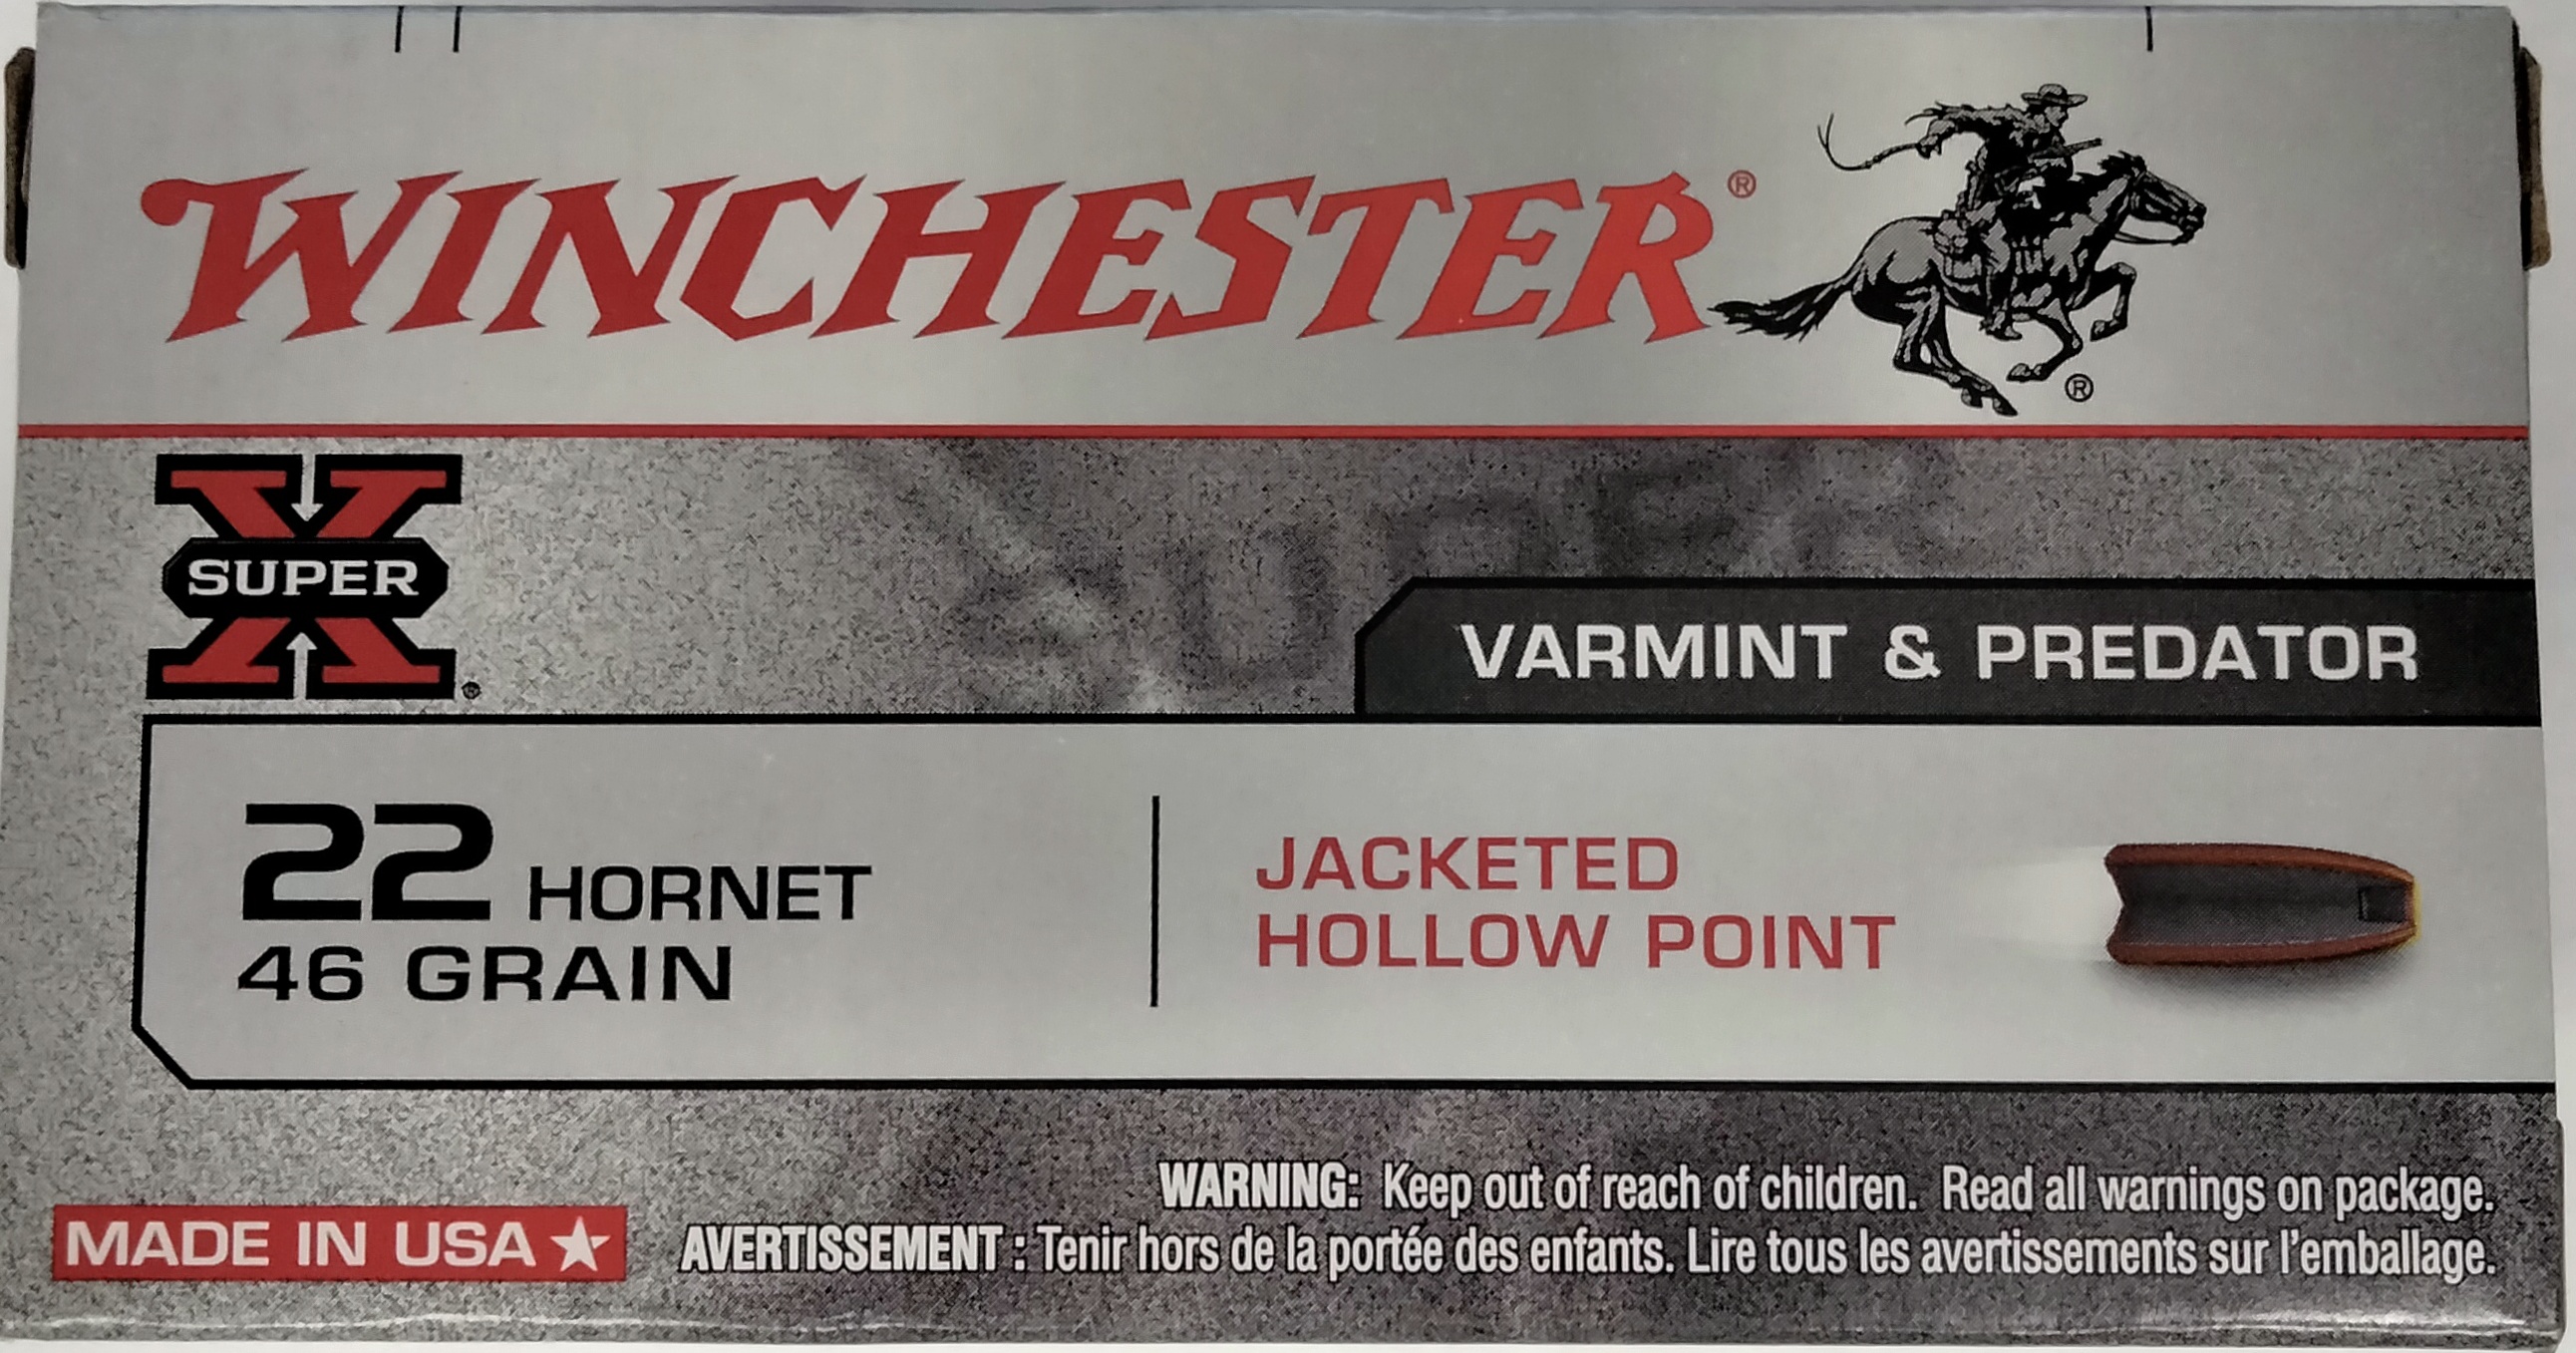 22 Hornet Winchester Super-X 46 gr. Jacketed Hollow Point JHP 50 rnds 2690 fps Brass M-ID: X22H2 UPC: 020892200517